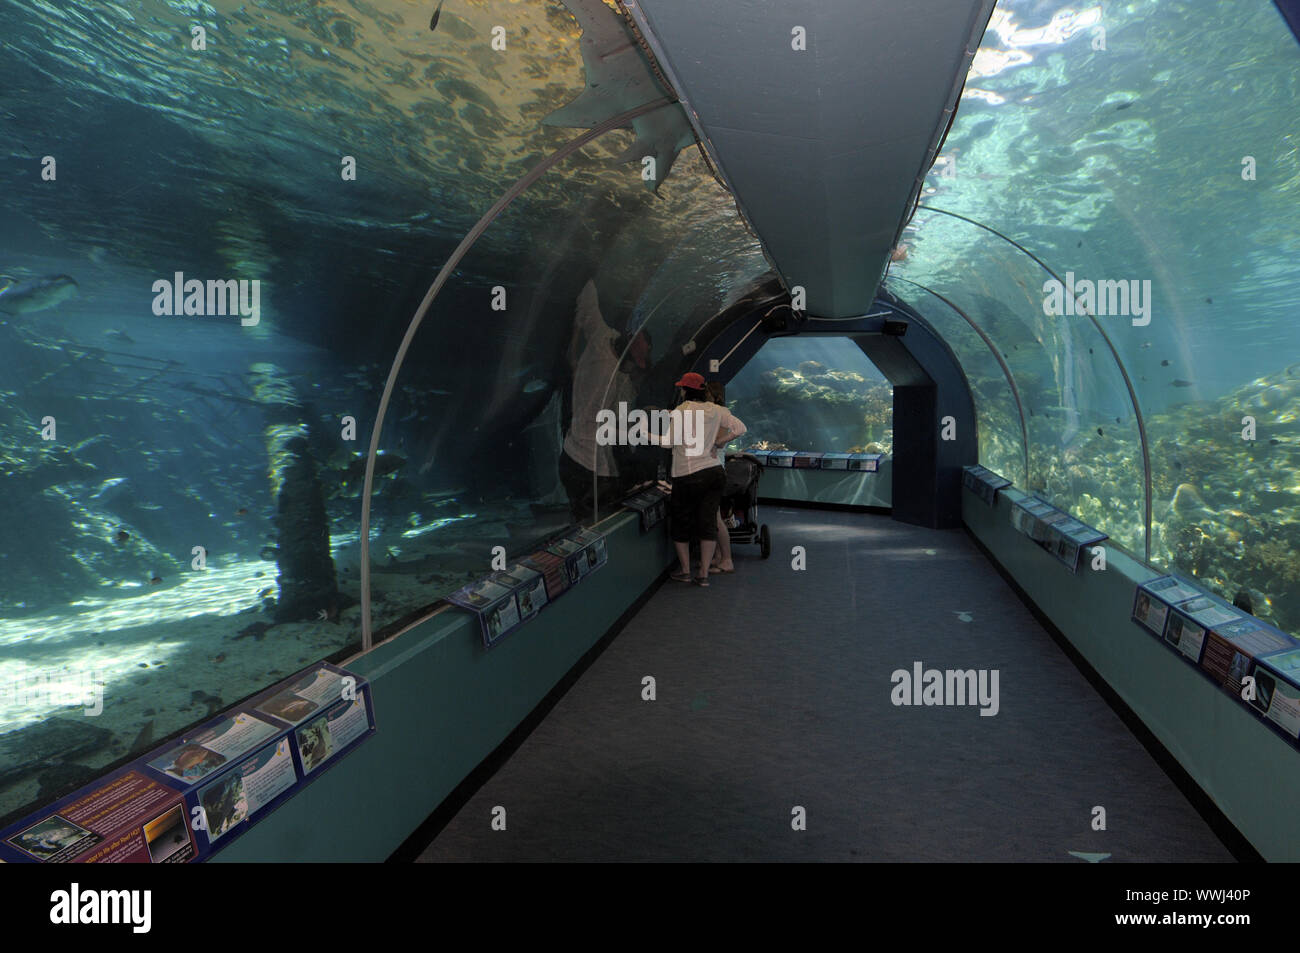 Tourists in the tunnel of HQ Reefworld in Townsville, Australia, Stock Photo